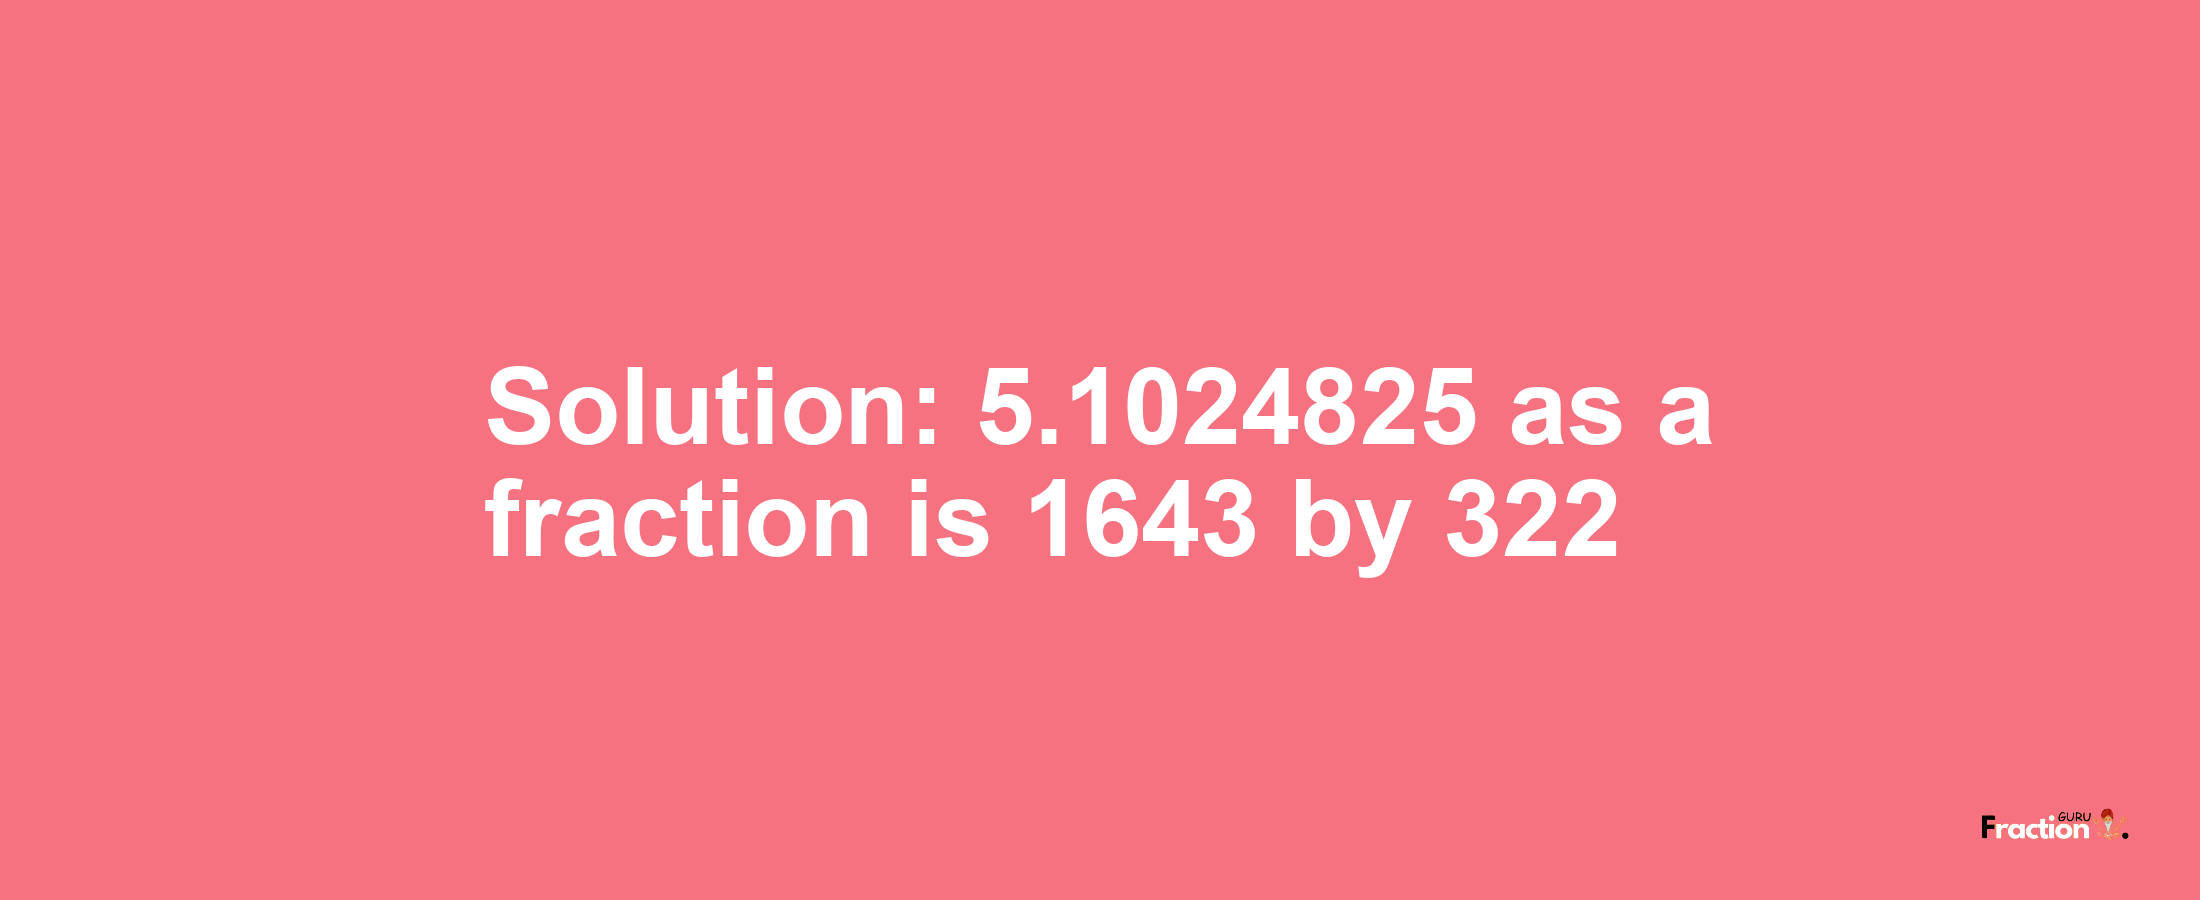 Solution:5.1024825 as a fraction is 1643/322